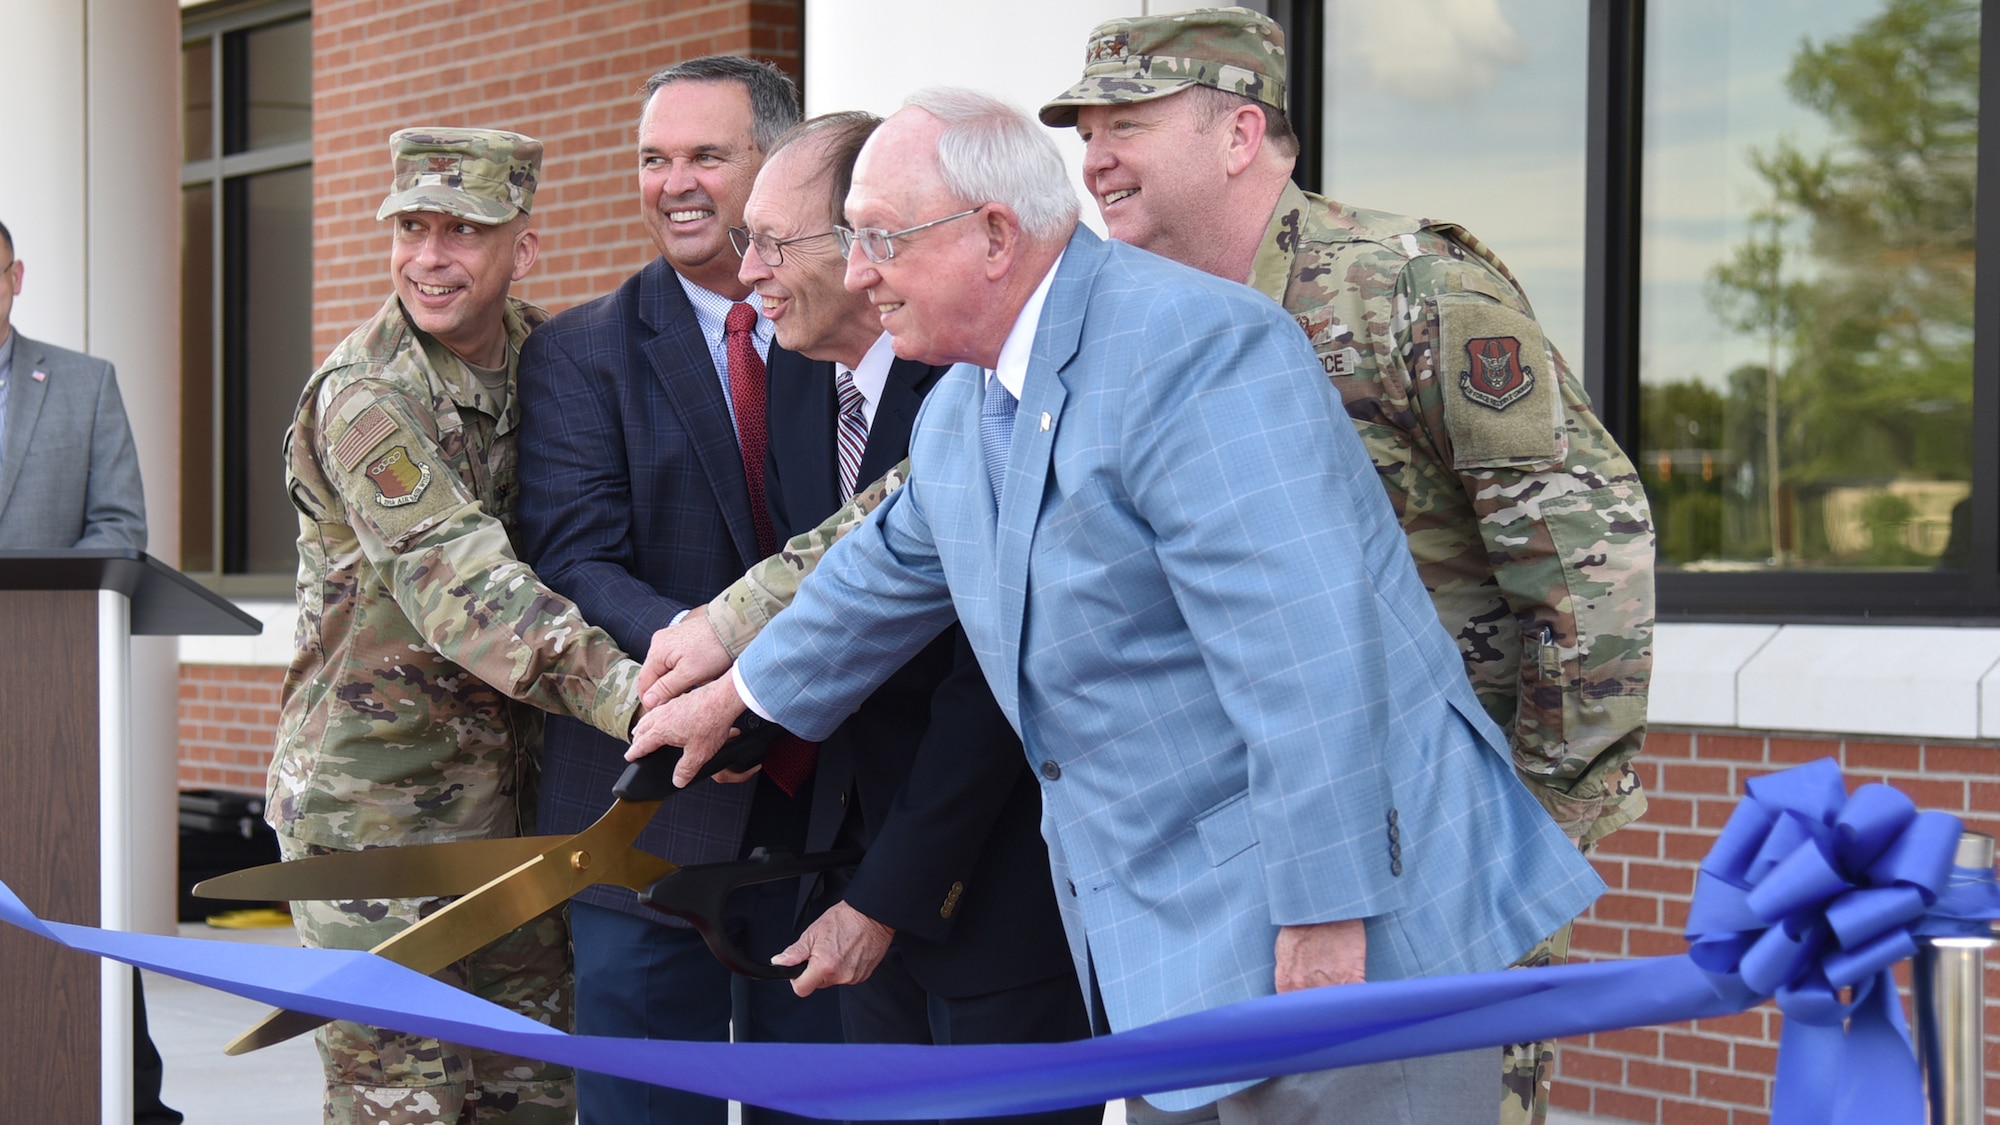 (From left to right) Col. Lyle Drew, 78th Air Base Wing commander, Warner Robins Mayor Randy Toms, retired Lt. Gen. Charles Stenner, Lt. Gen. Richard Scobee, commander of Air Force Reserve Command and Houston County Commissioners Chairman Tommy Stalnaker cut the ribbon during a ribbon cutting ceremony celebrating the completion of phase one of the consolidated mission complex June 25, on Robins Air Force Base in Georgia. Once completed the three-phase project will bring together 965 employees who are currently separated in nine different facilities. (U.S. Air Force photo by Misuzu Allen)